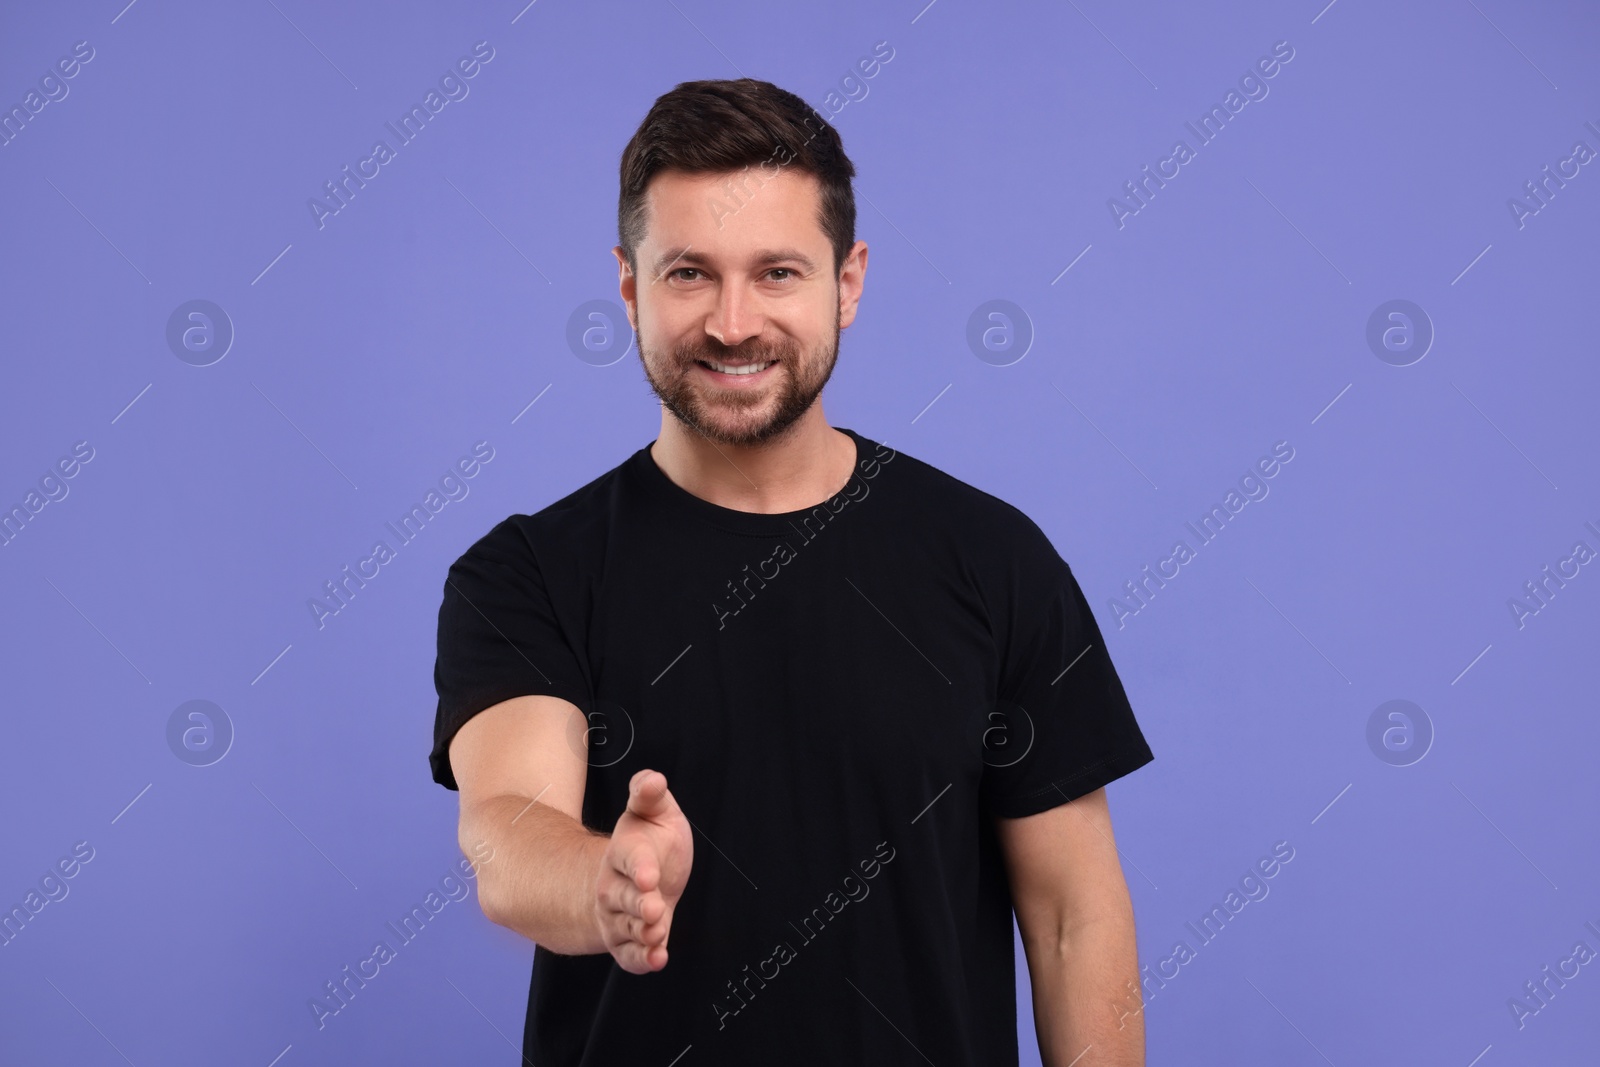 Photo of Happy man welcoming and offering handshake on purple background